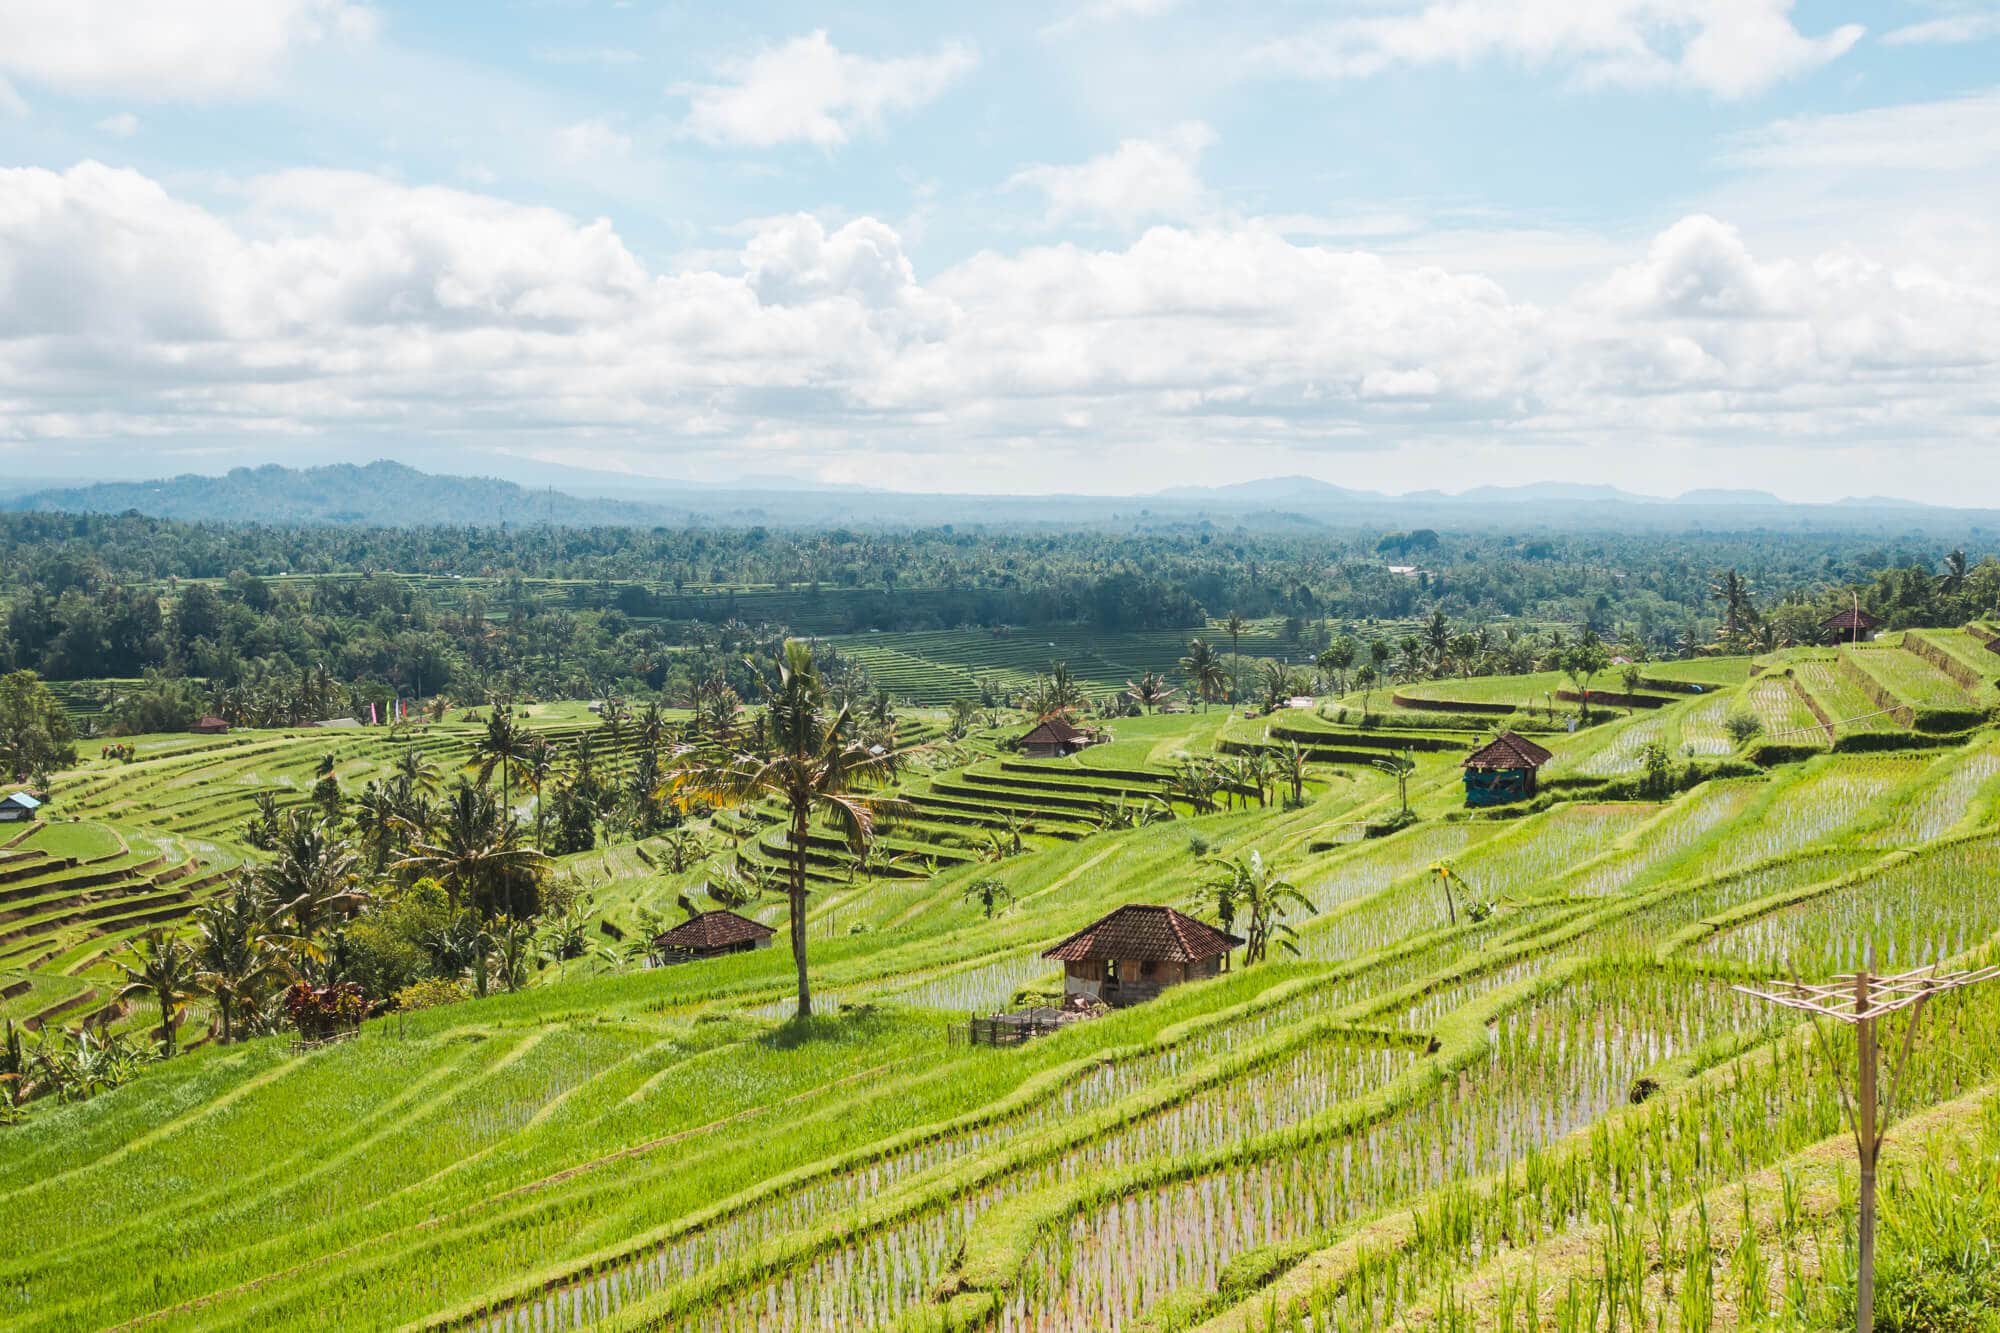 View of the incredible Jatiluwih Rice Terraces in Bali in February when the rice plants had just been planted